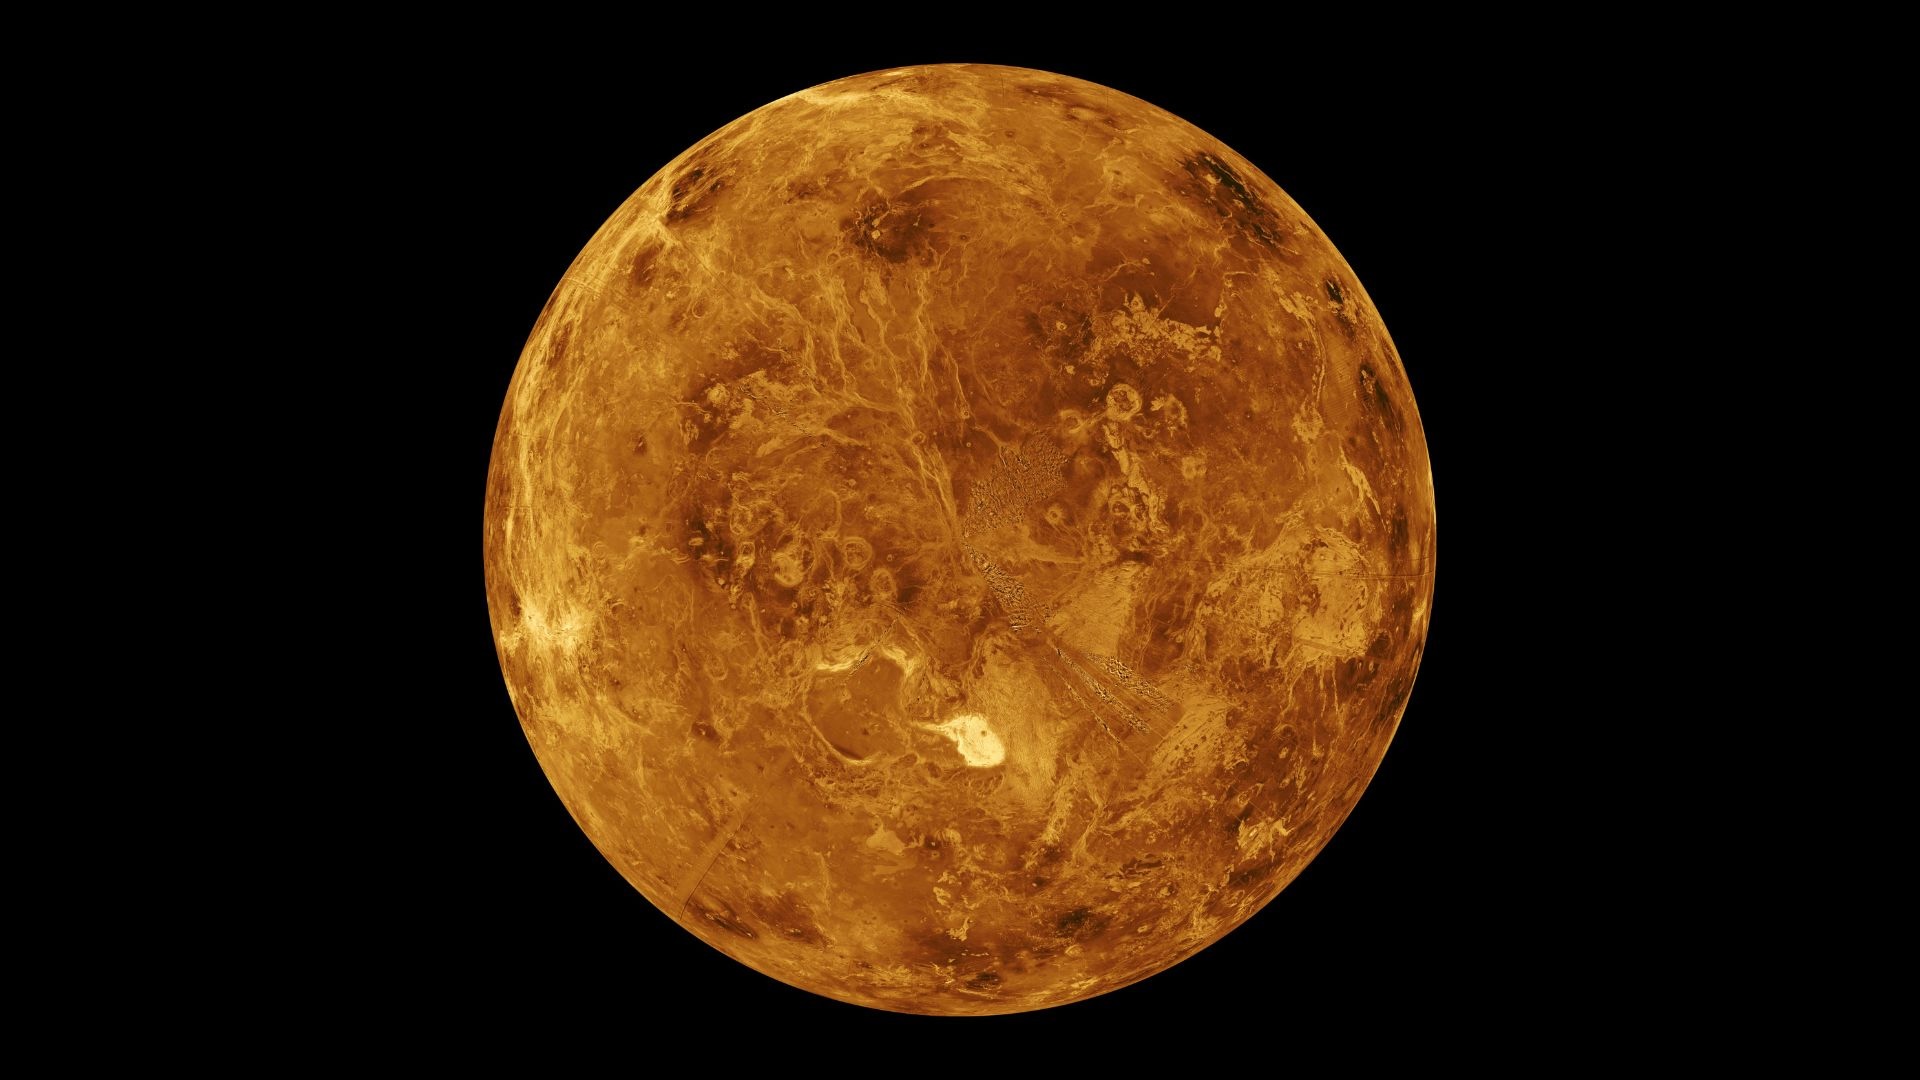 Molecule responsible for robbing Venus of its water may finally have been identified